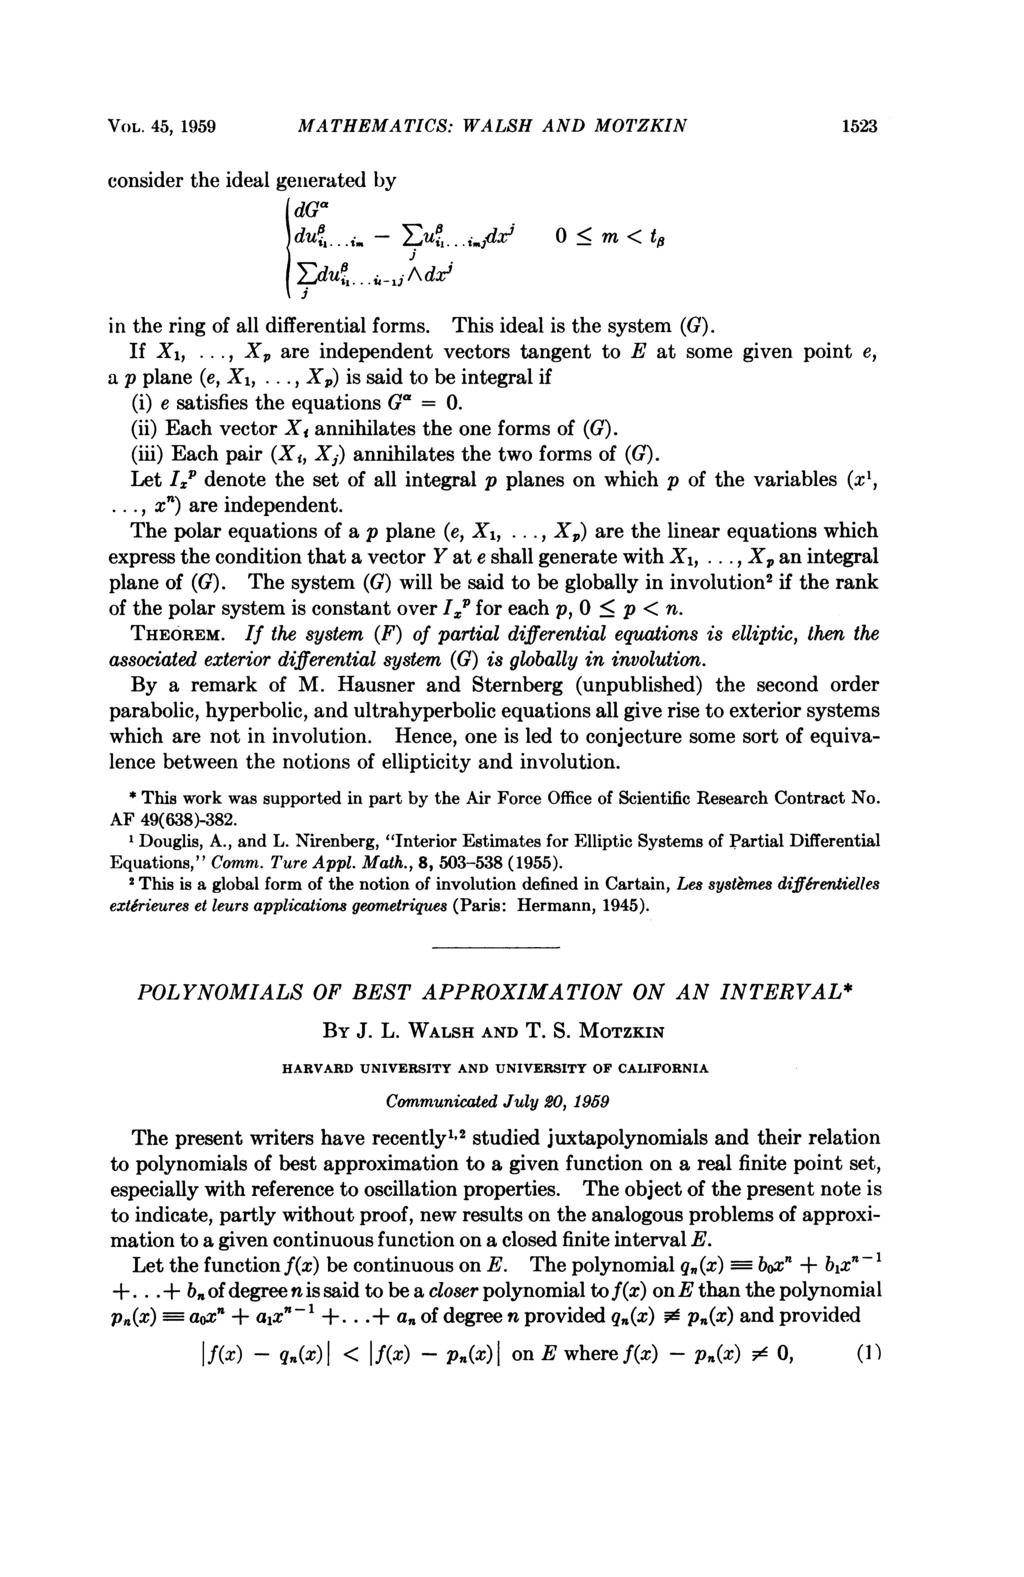 VOL. 45, 1959 MATHEMATICS: WALSH AND MOTZKIN 1523 consider the ideal generated by dga duel. i Eua...i.,,xj 0 < m < to Eduq.. AujAdm in the ring of all differential forms. This ideal is the system (G).